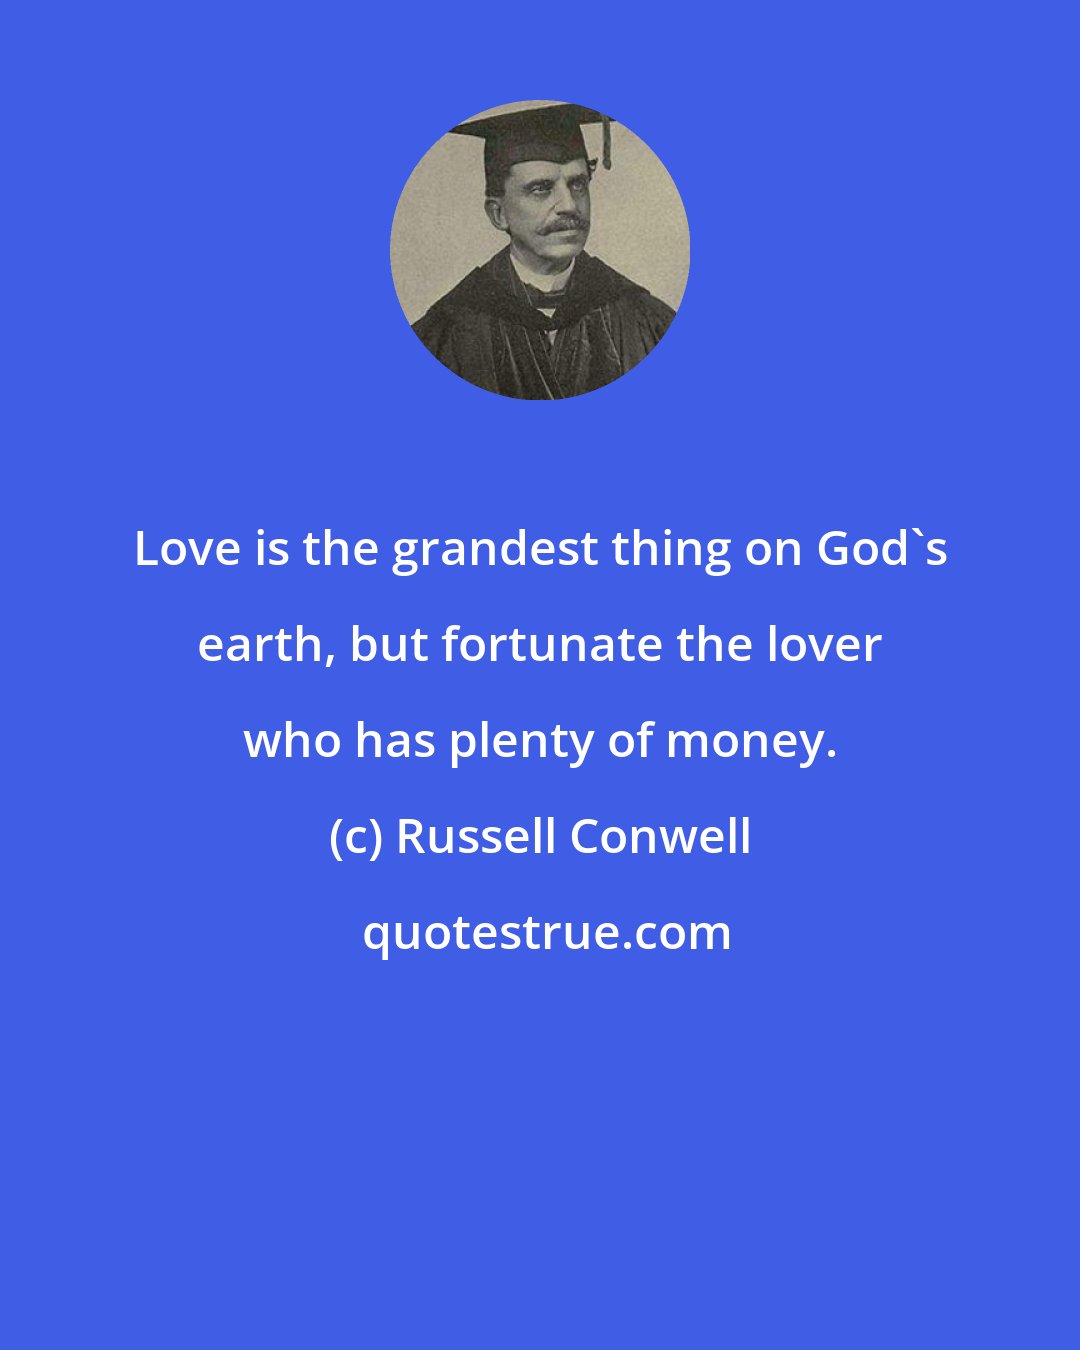 Russell Conwell: Love is the grandest thing on God's earth, but fortunate the lover who has plenty of money.